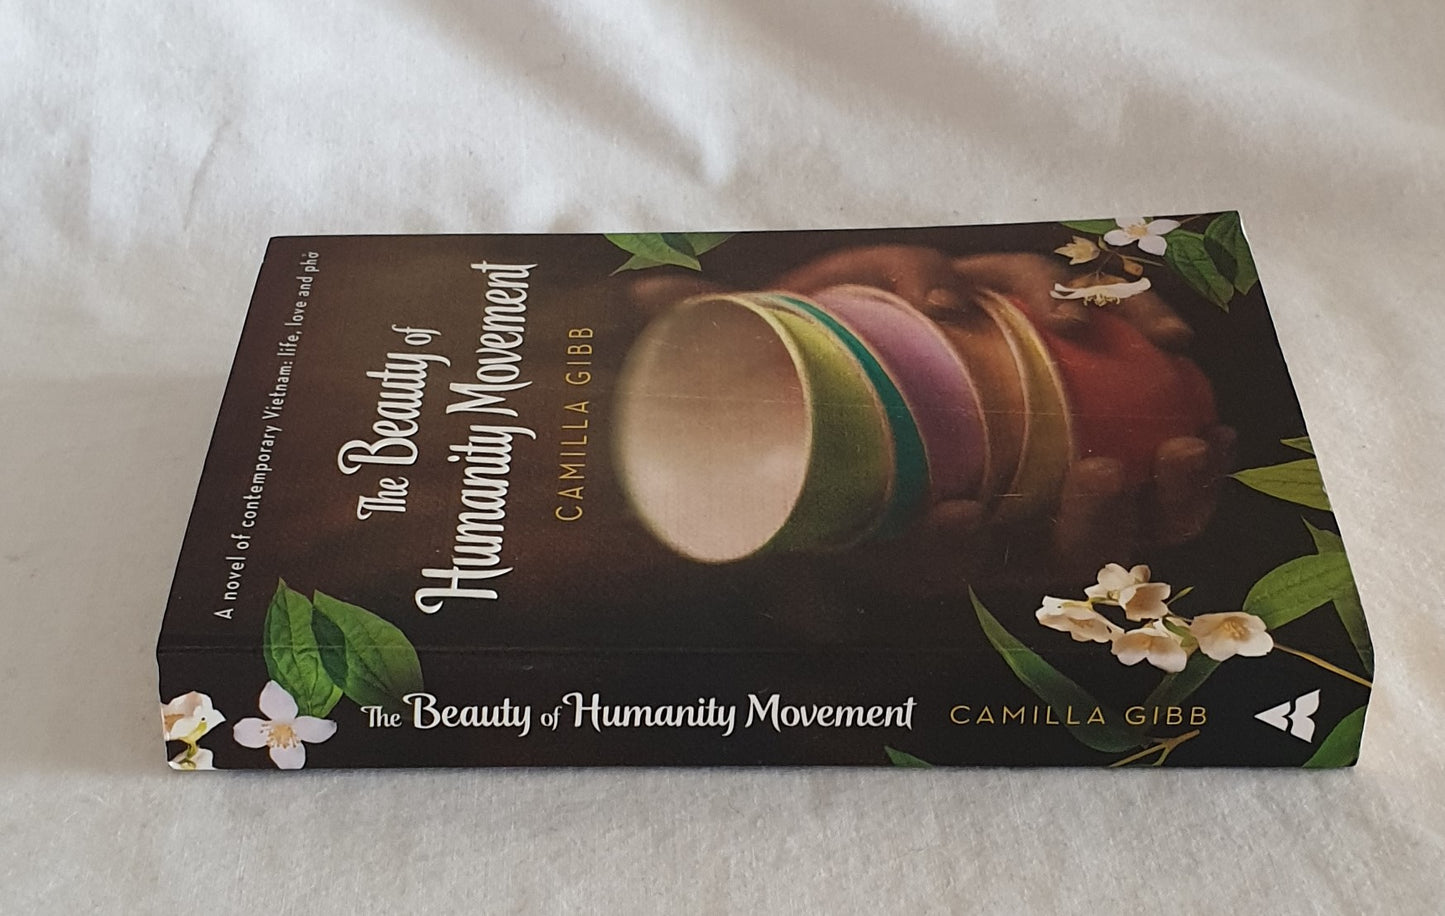 The Beauty of Humanity Movement by Camilla Gibb